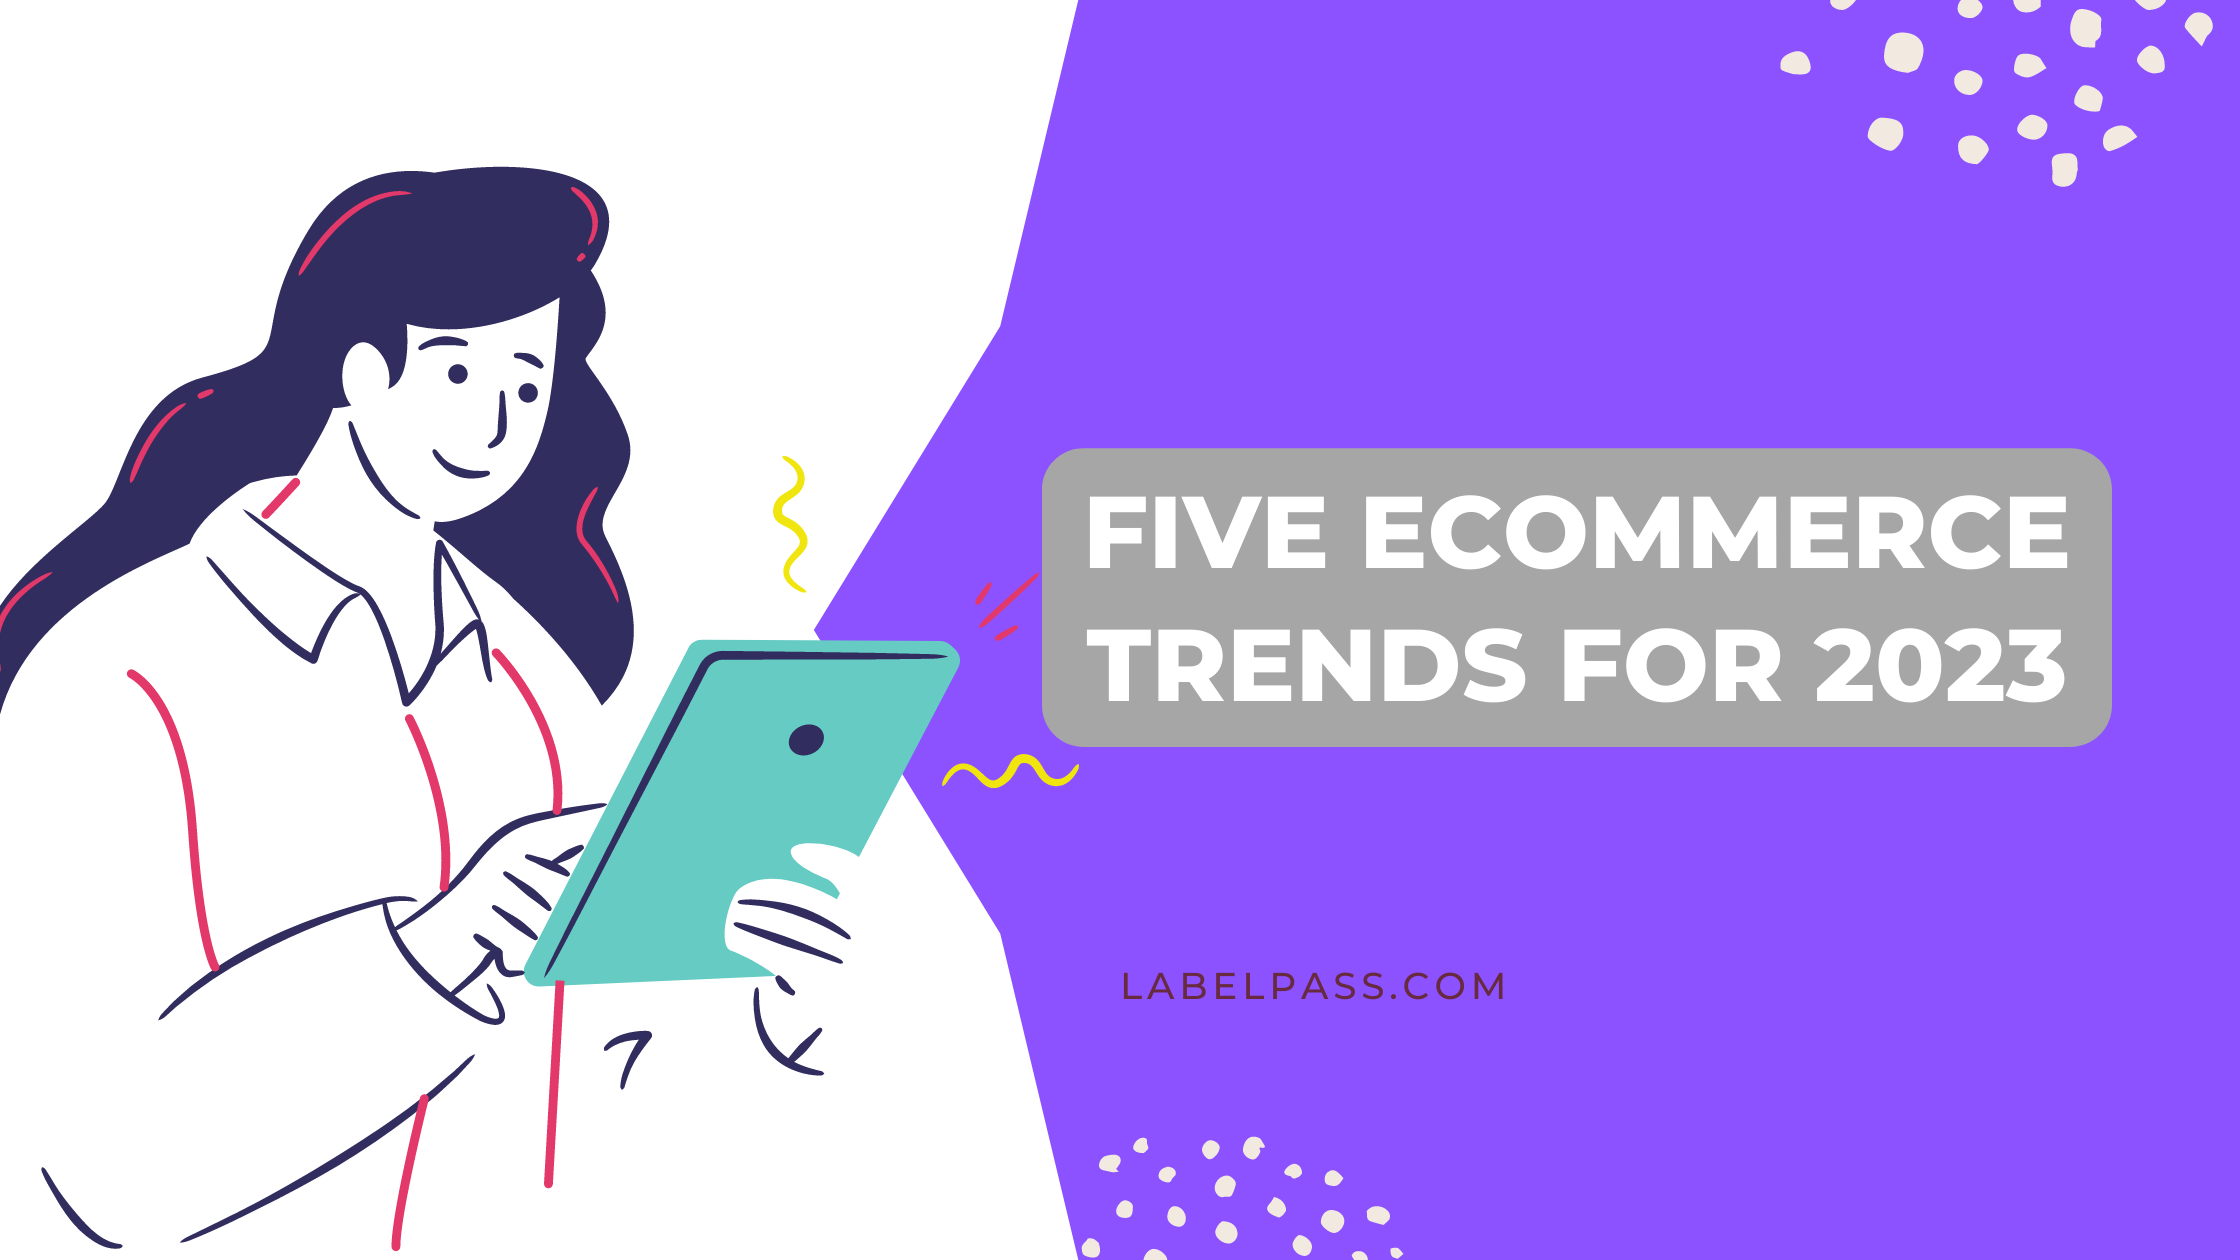 Five eCommerce Trends for 2023